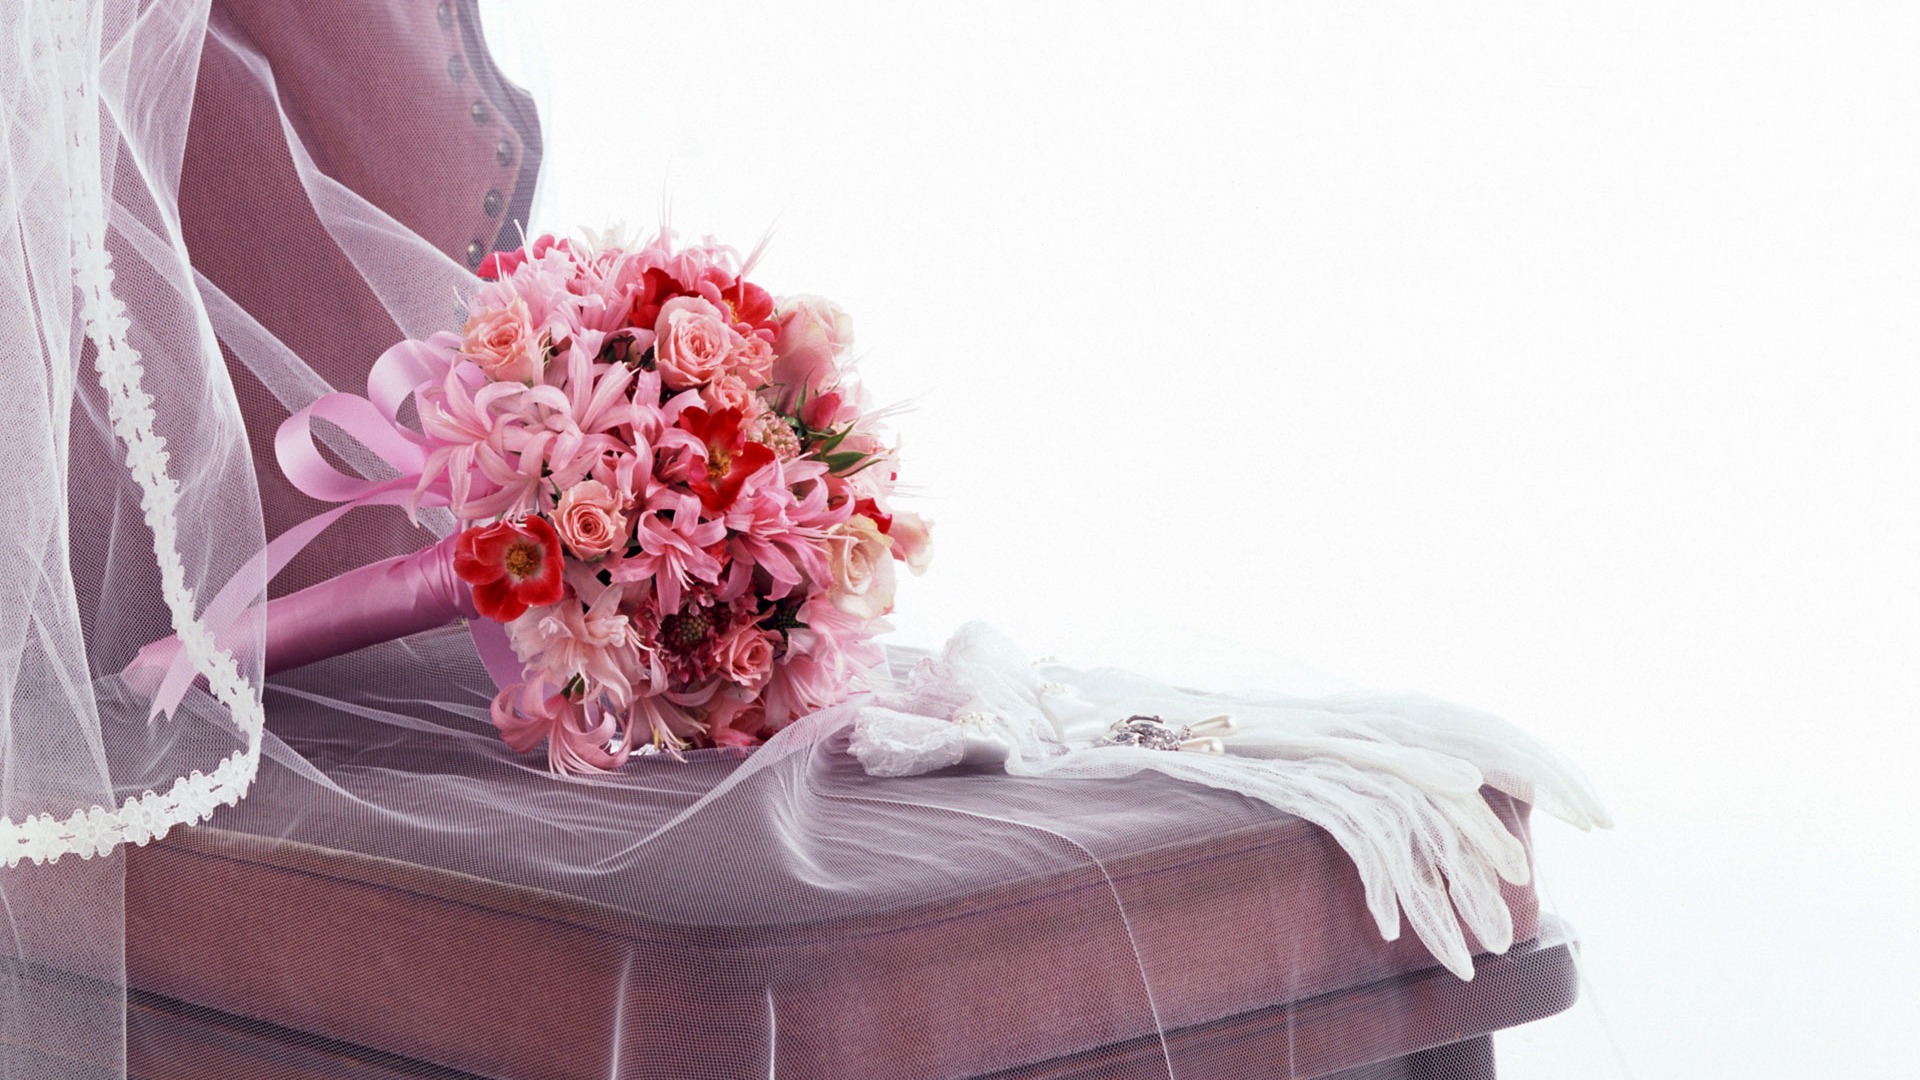 Weddings and Flowers wallpaper (1) #8 - 1920x1080